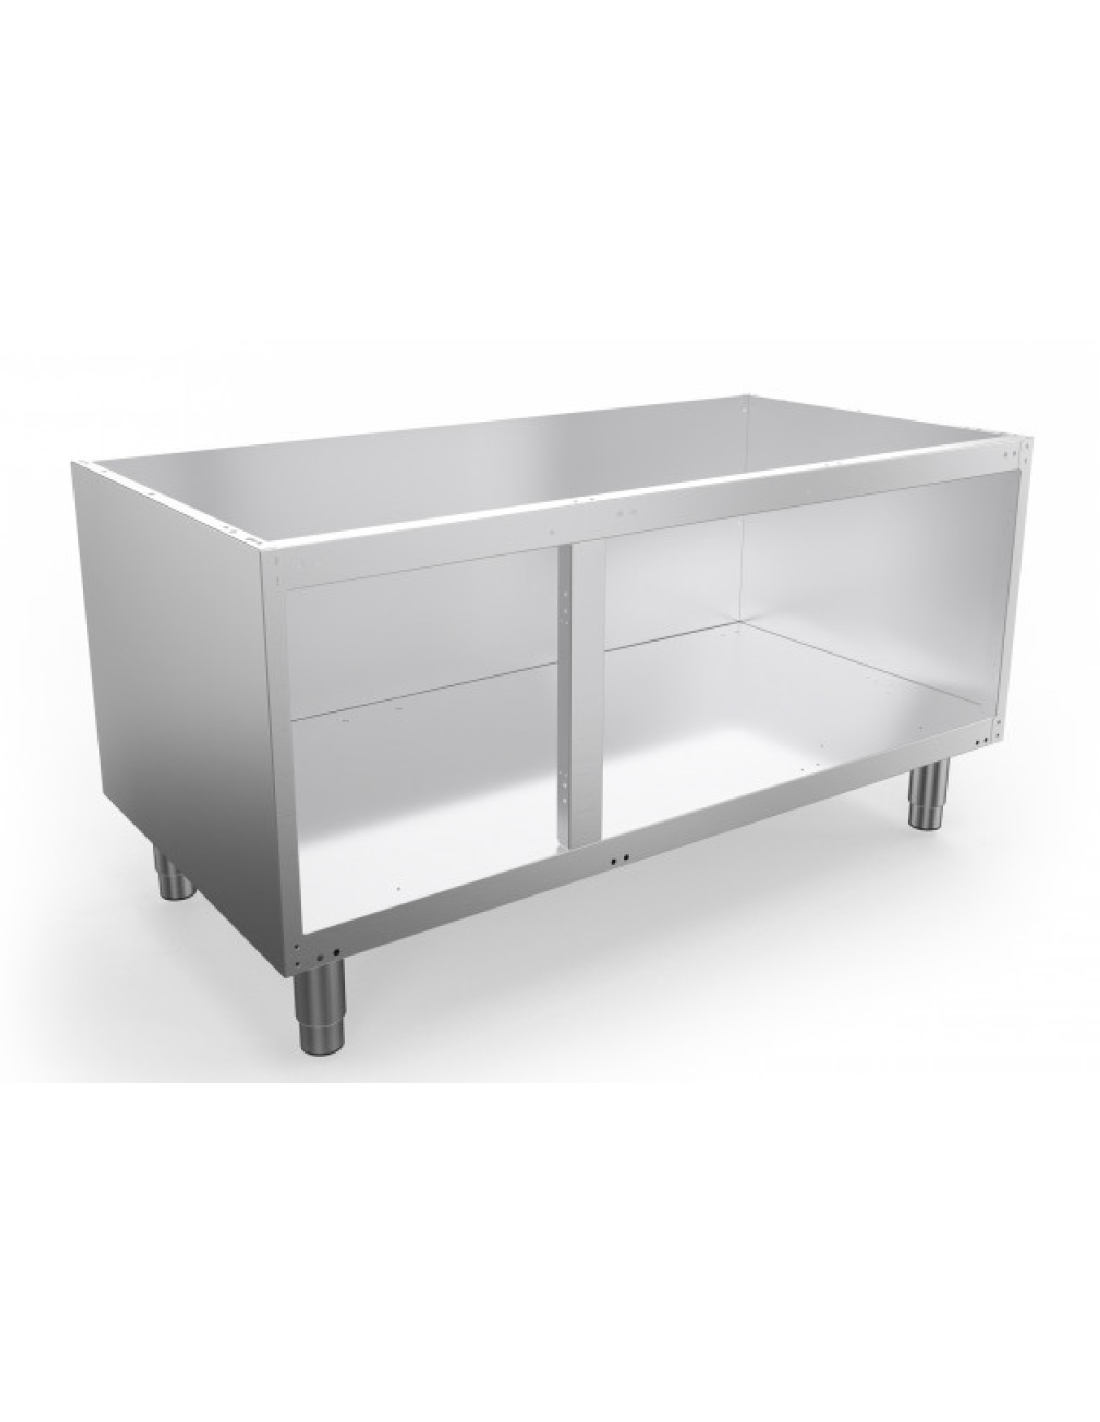 Neutral base with open compartment cm 120 x 64.5 x 62 h